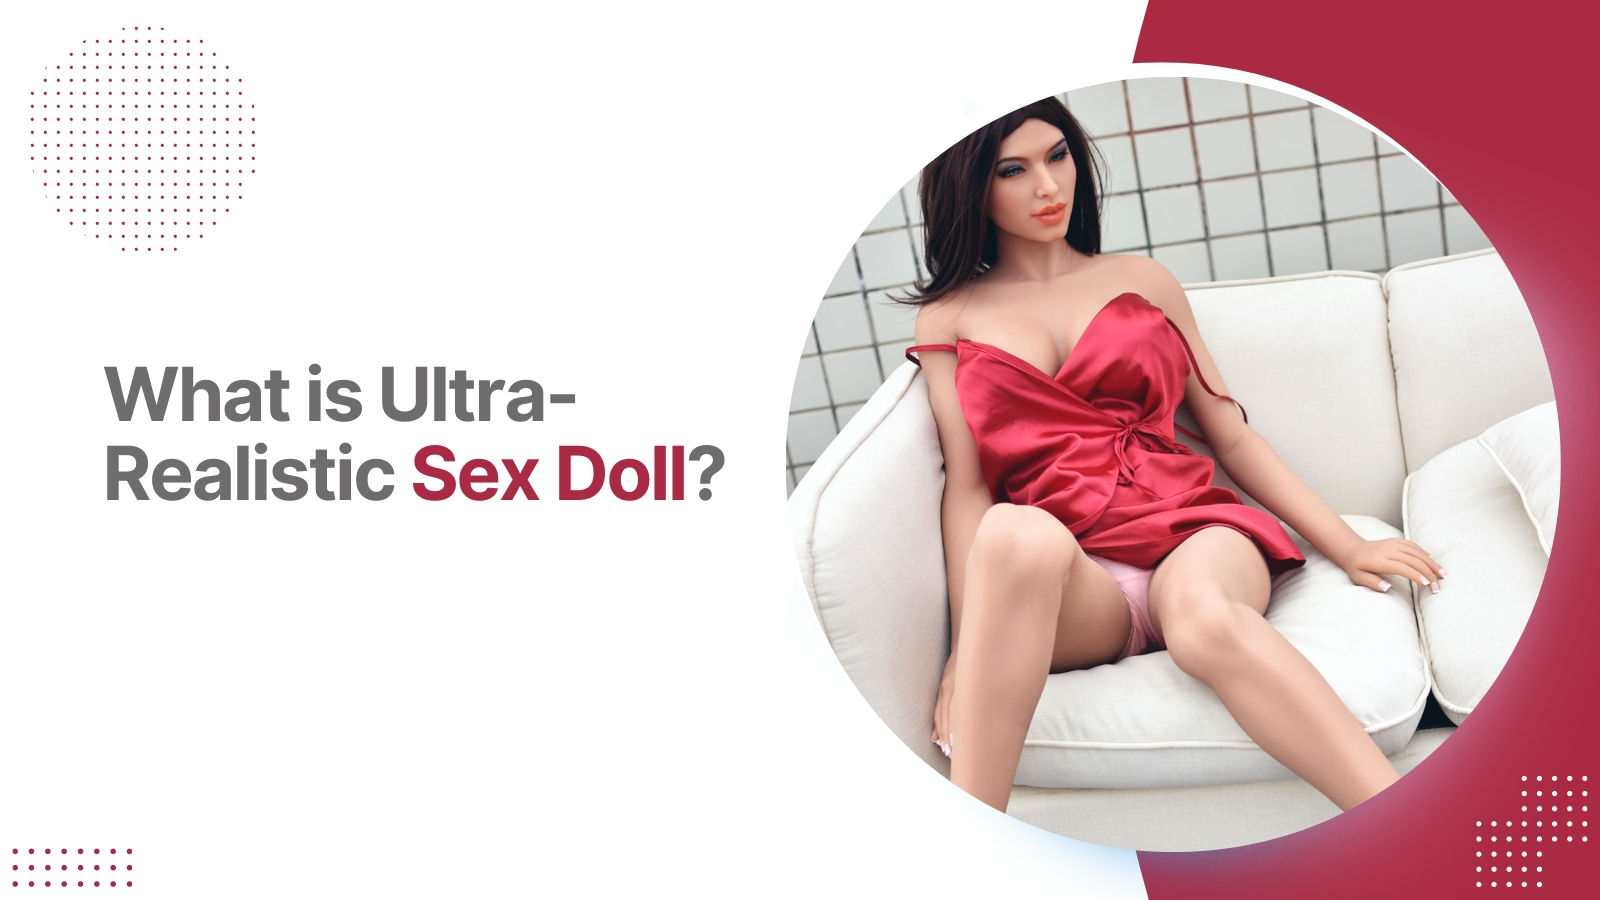 what is ultra-realistic sex doll